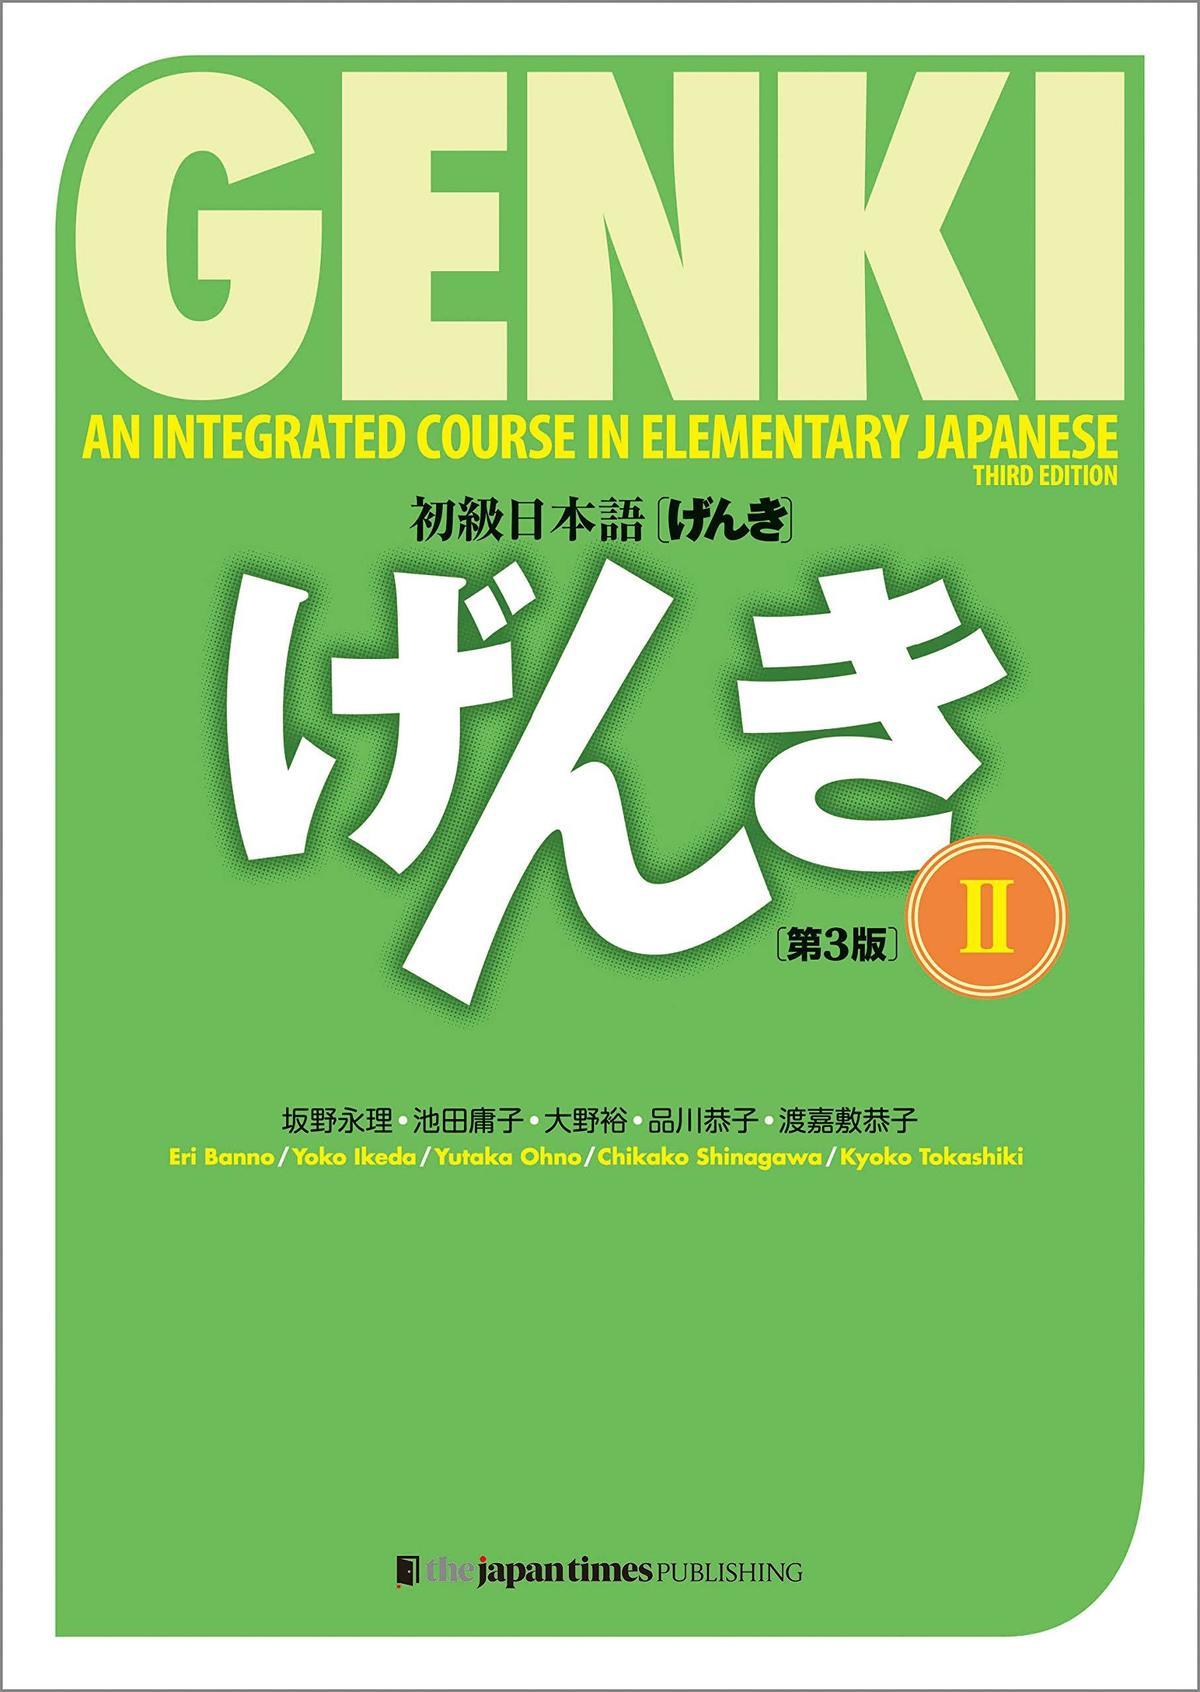 Genki 2 An Integrated Course in Elementary Japanese (Textbook) Revised 3rd Edition